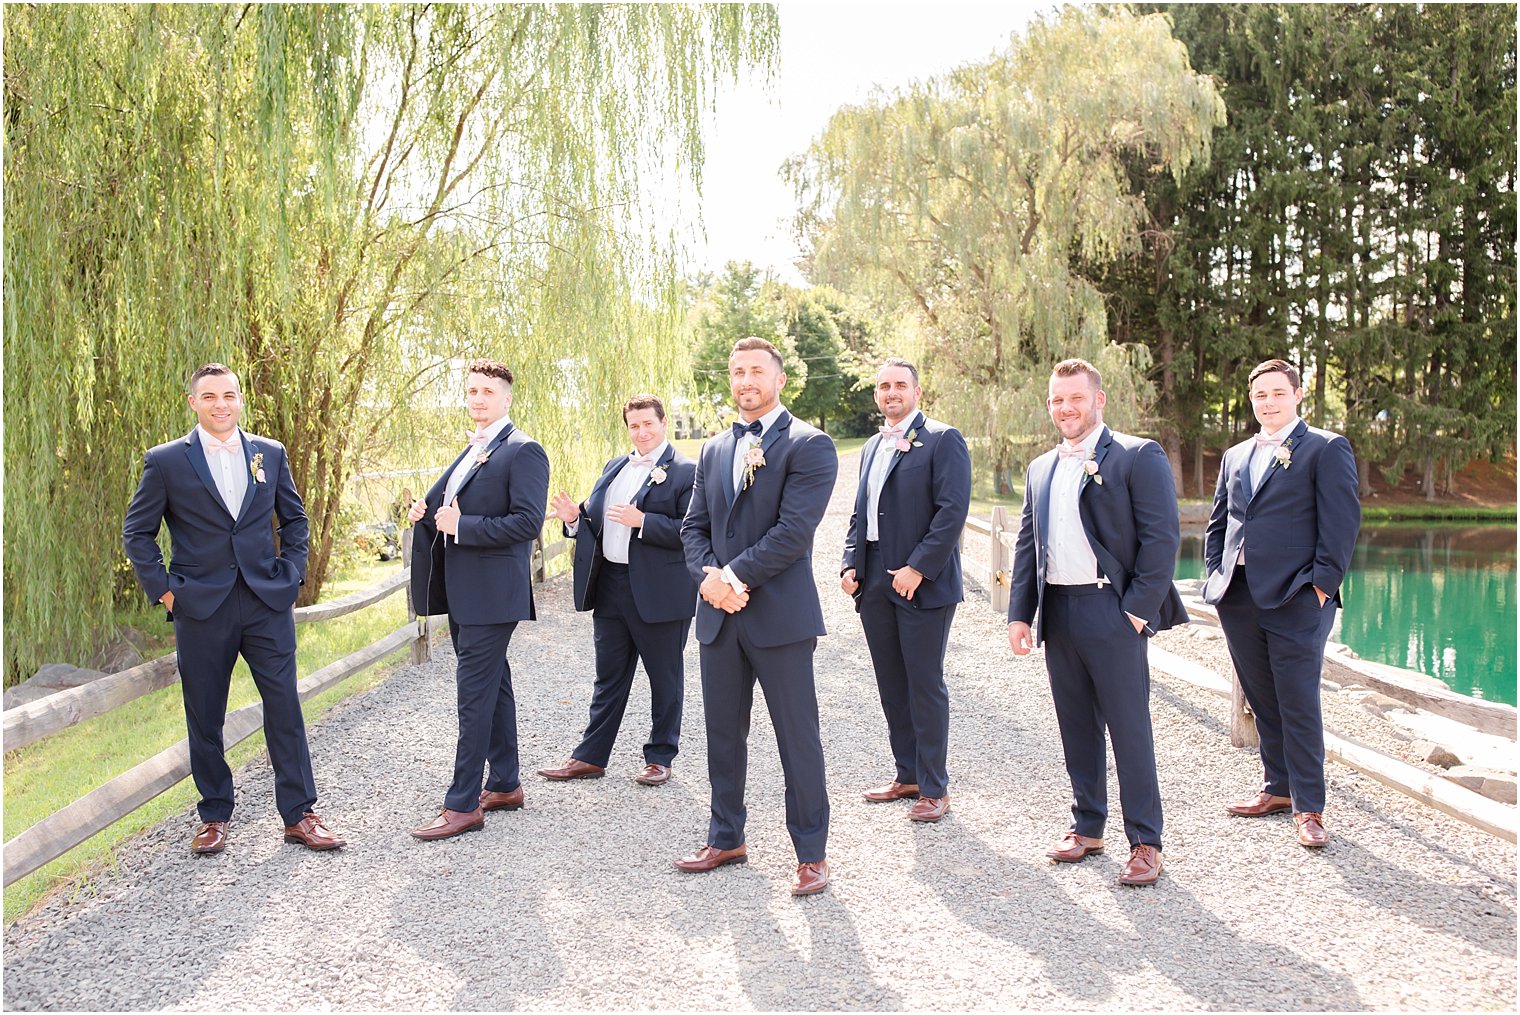 groom with groomsmen in navy suits by pond at Windows on the Water at Frogbridge